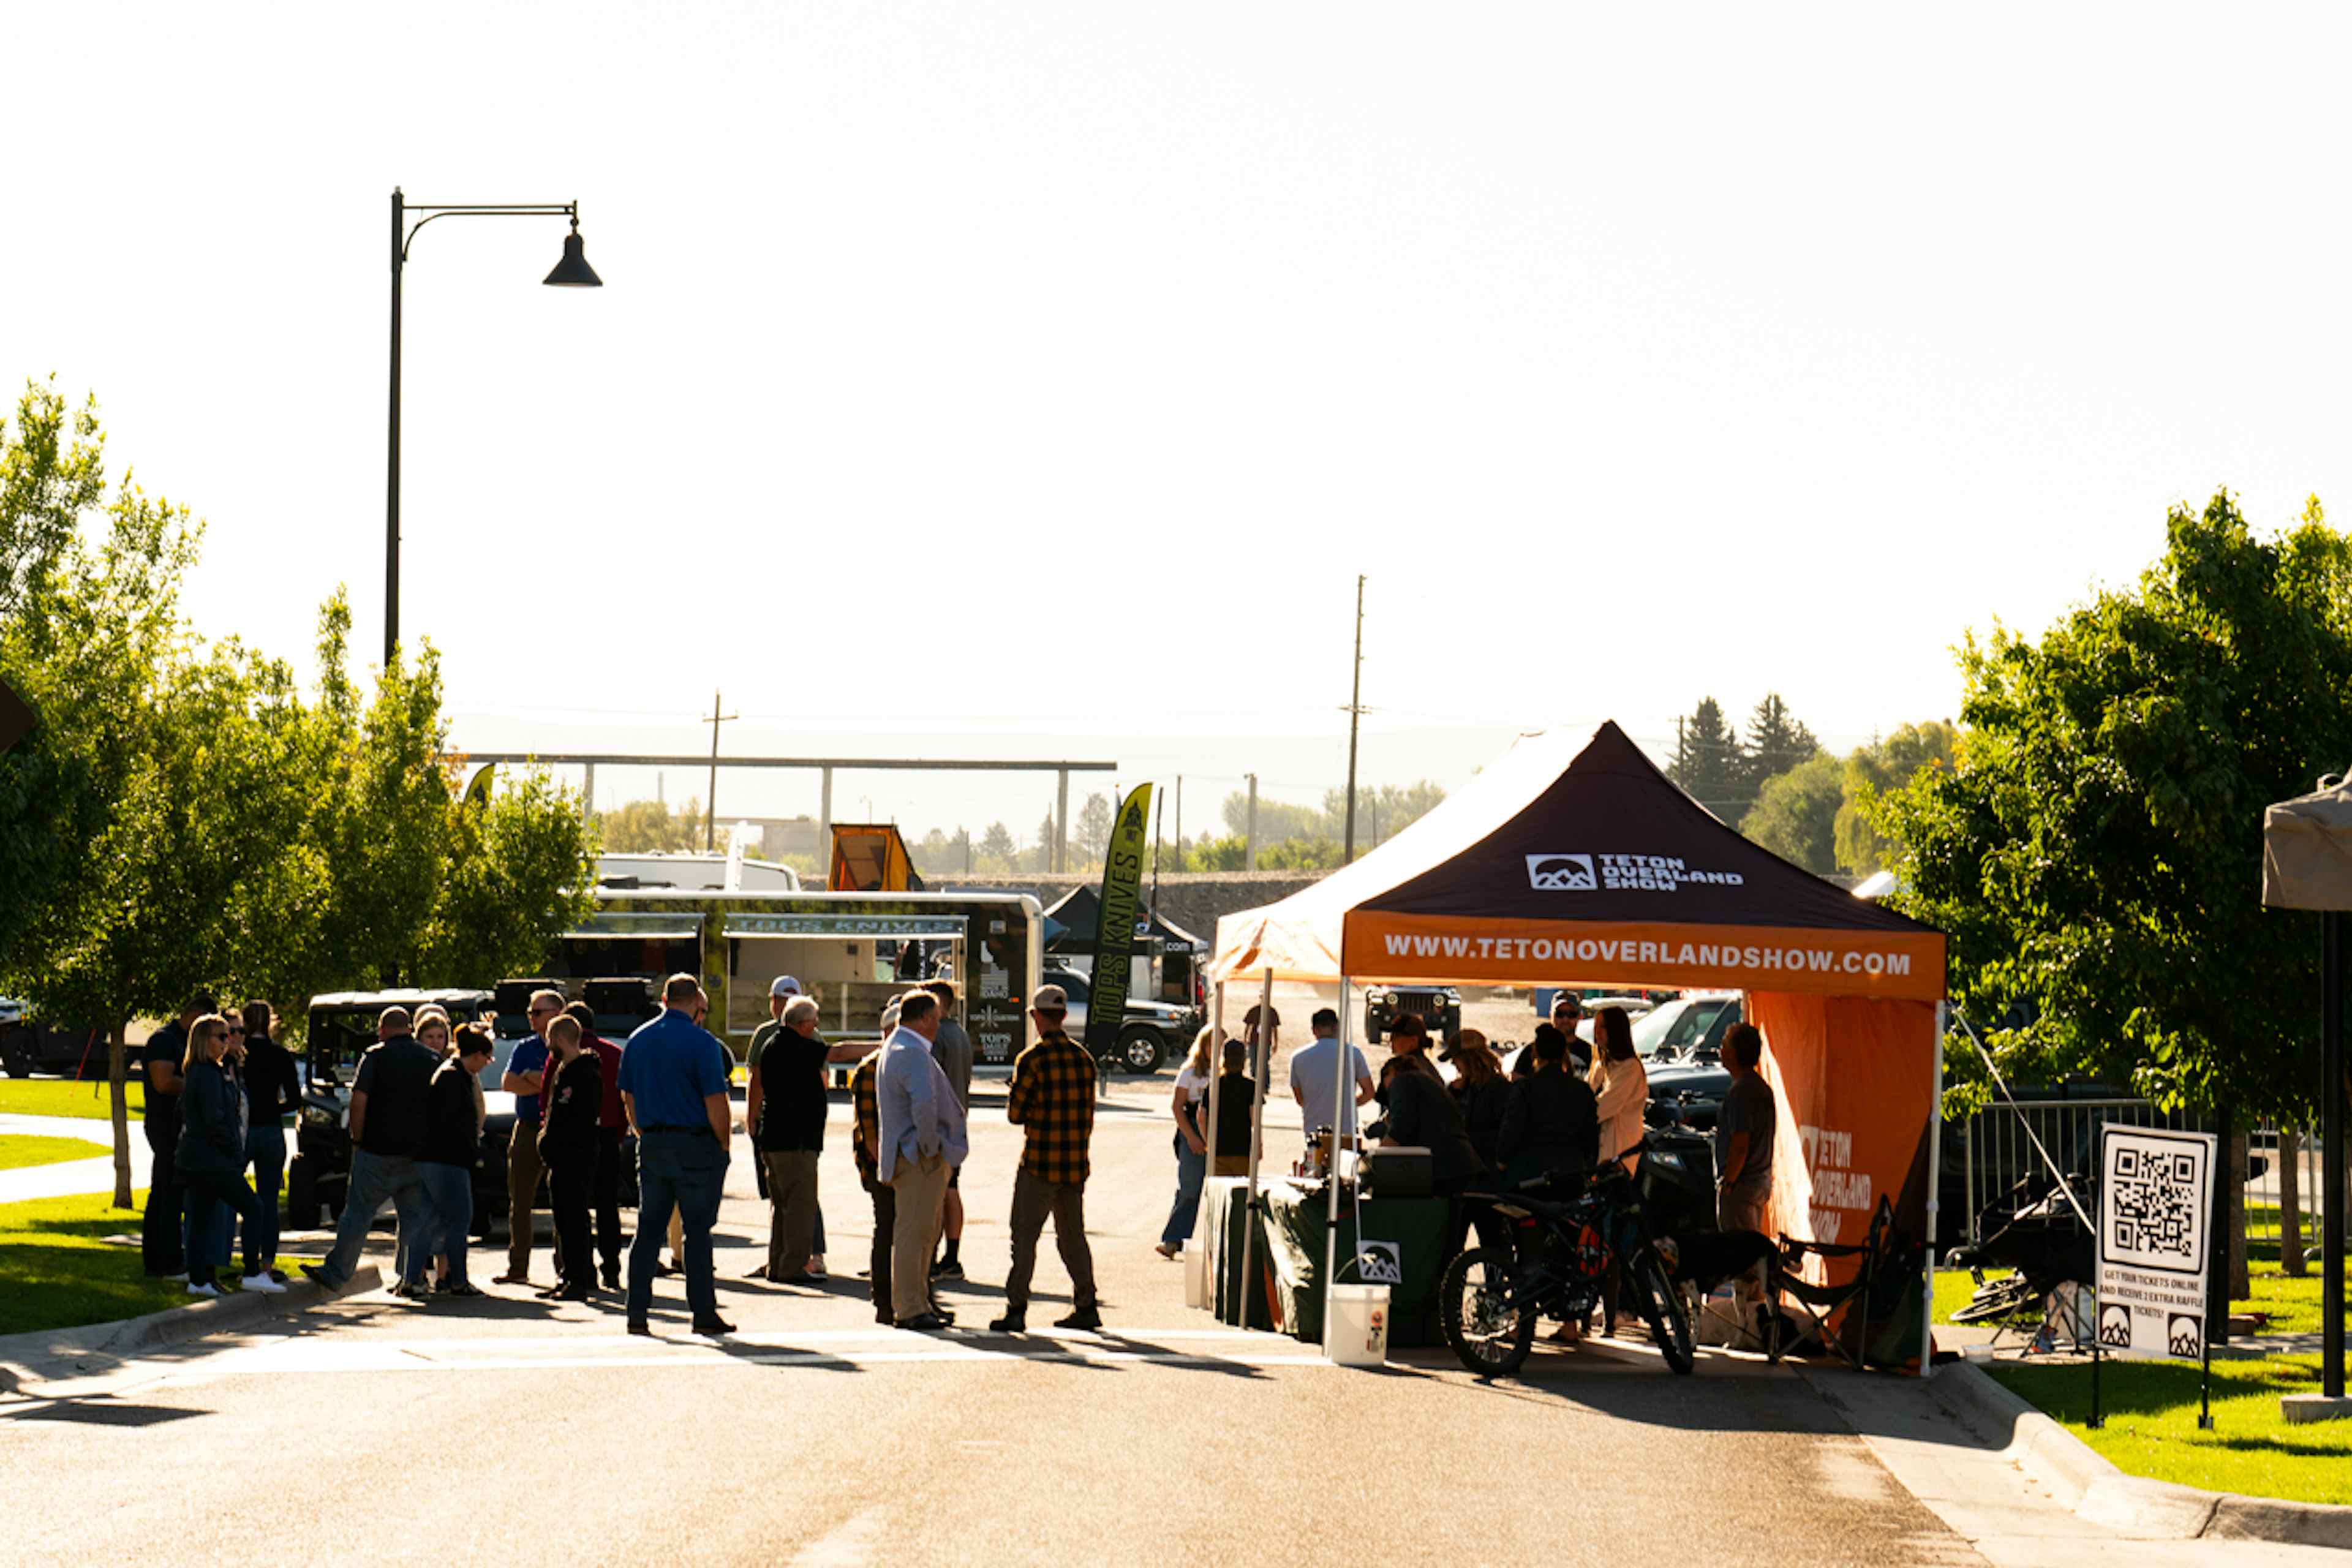 Attendees stand in line to attend the Teton Overland Show in Idaho Falls.